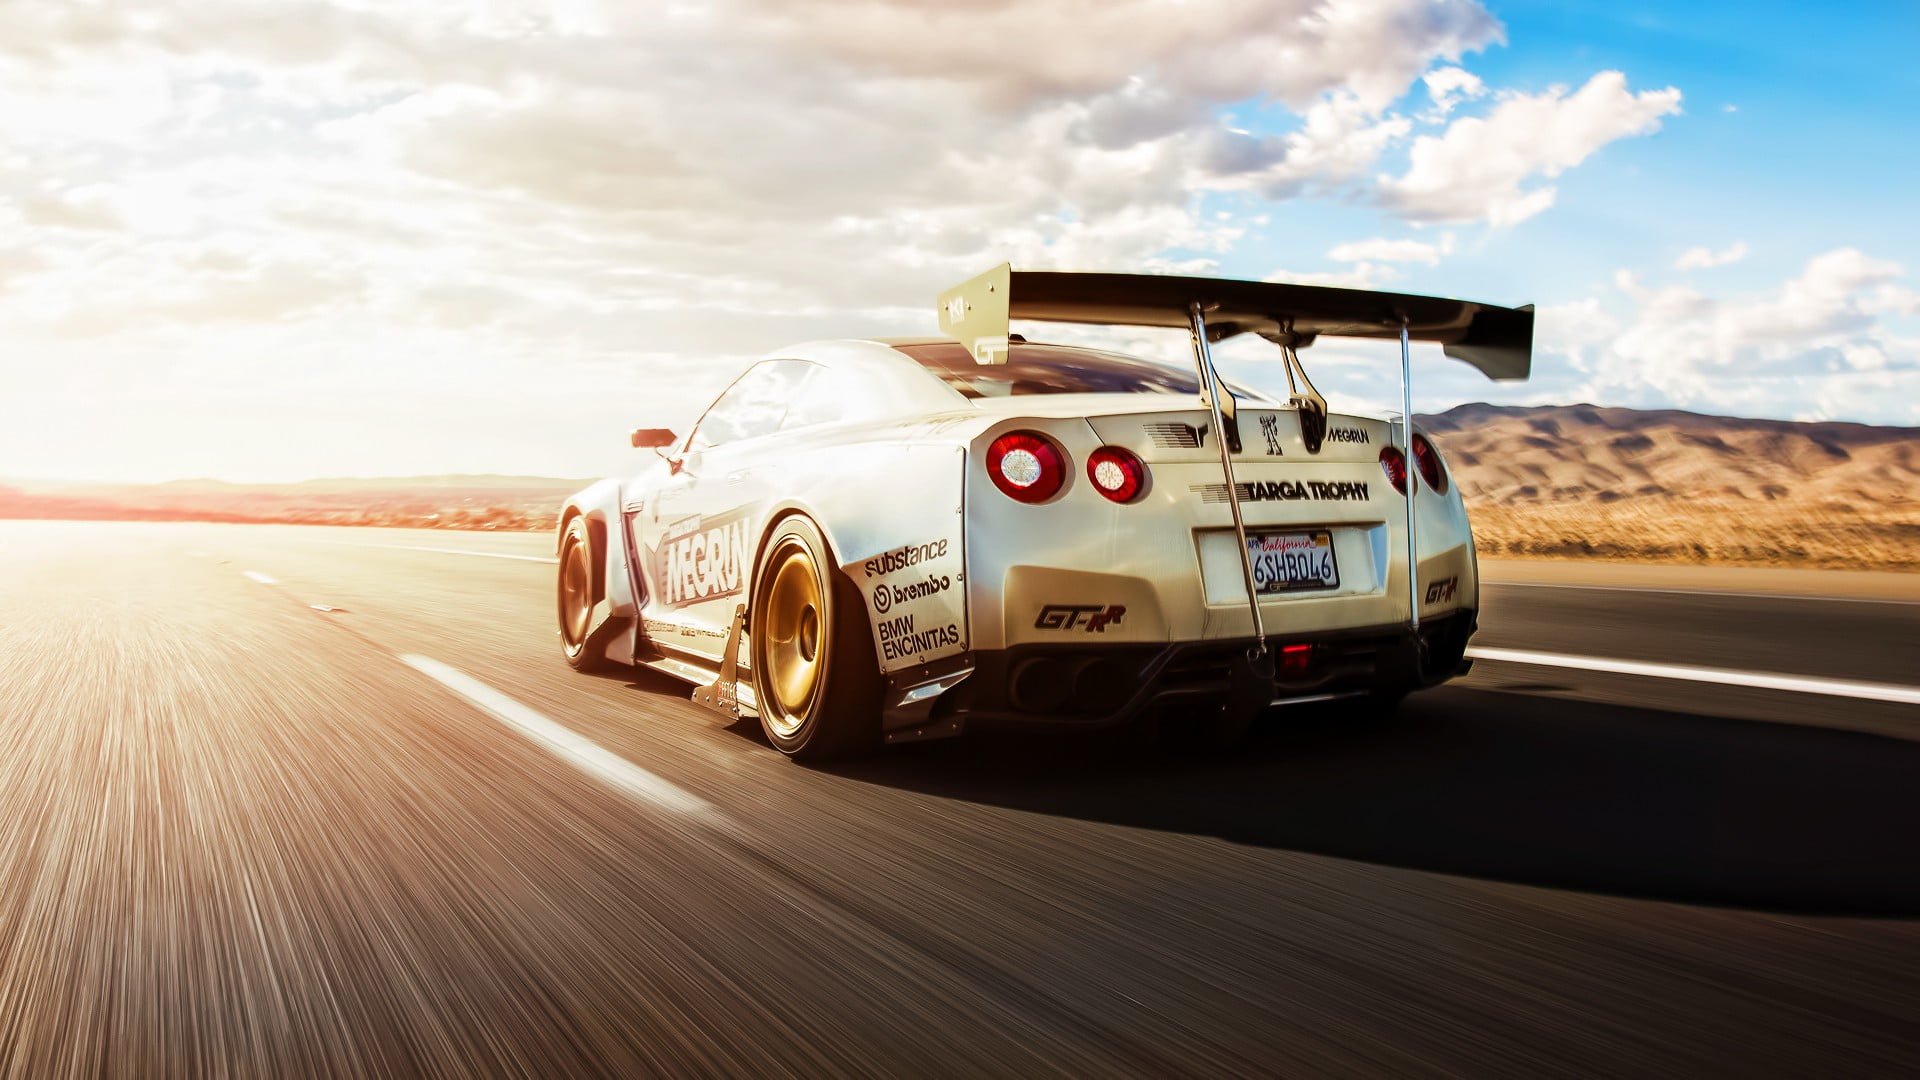 gray coupe, car, tuning, Nissan Skyline GT-R R35, mode of transportation